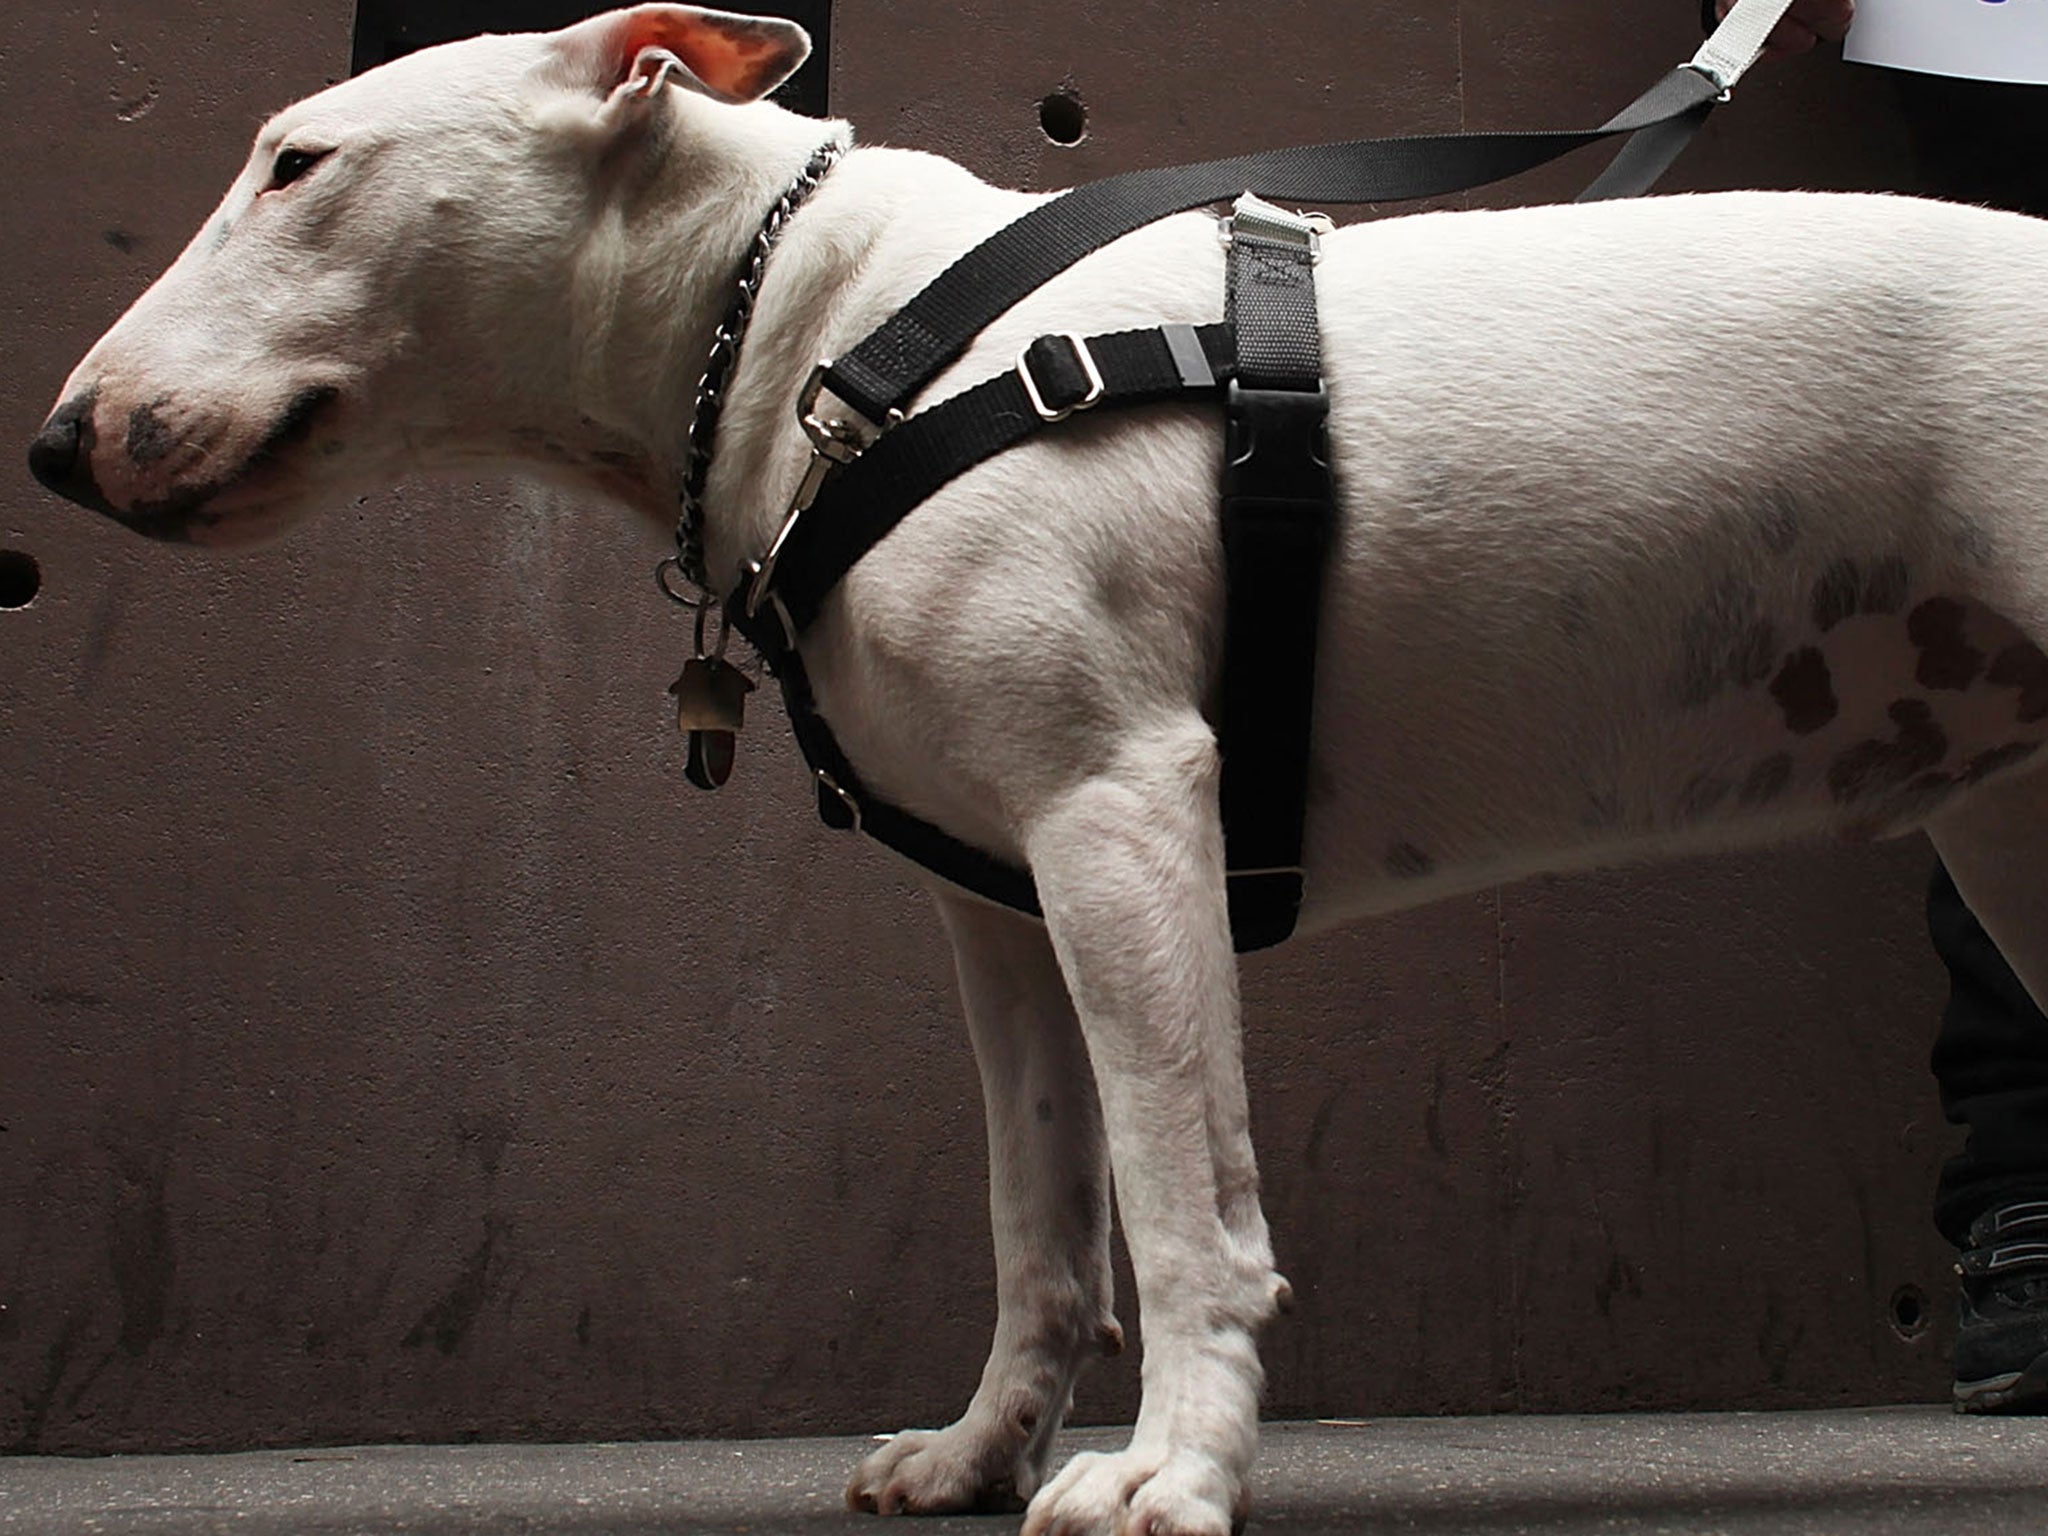 A bull terrier, similar to the dog rescued in Oklahoma.